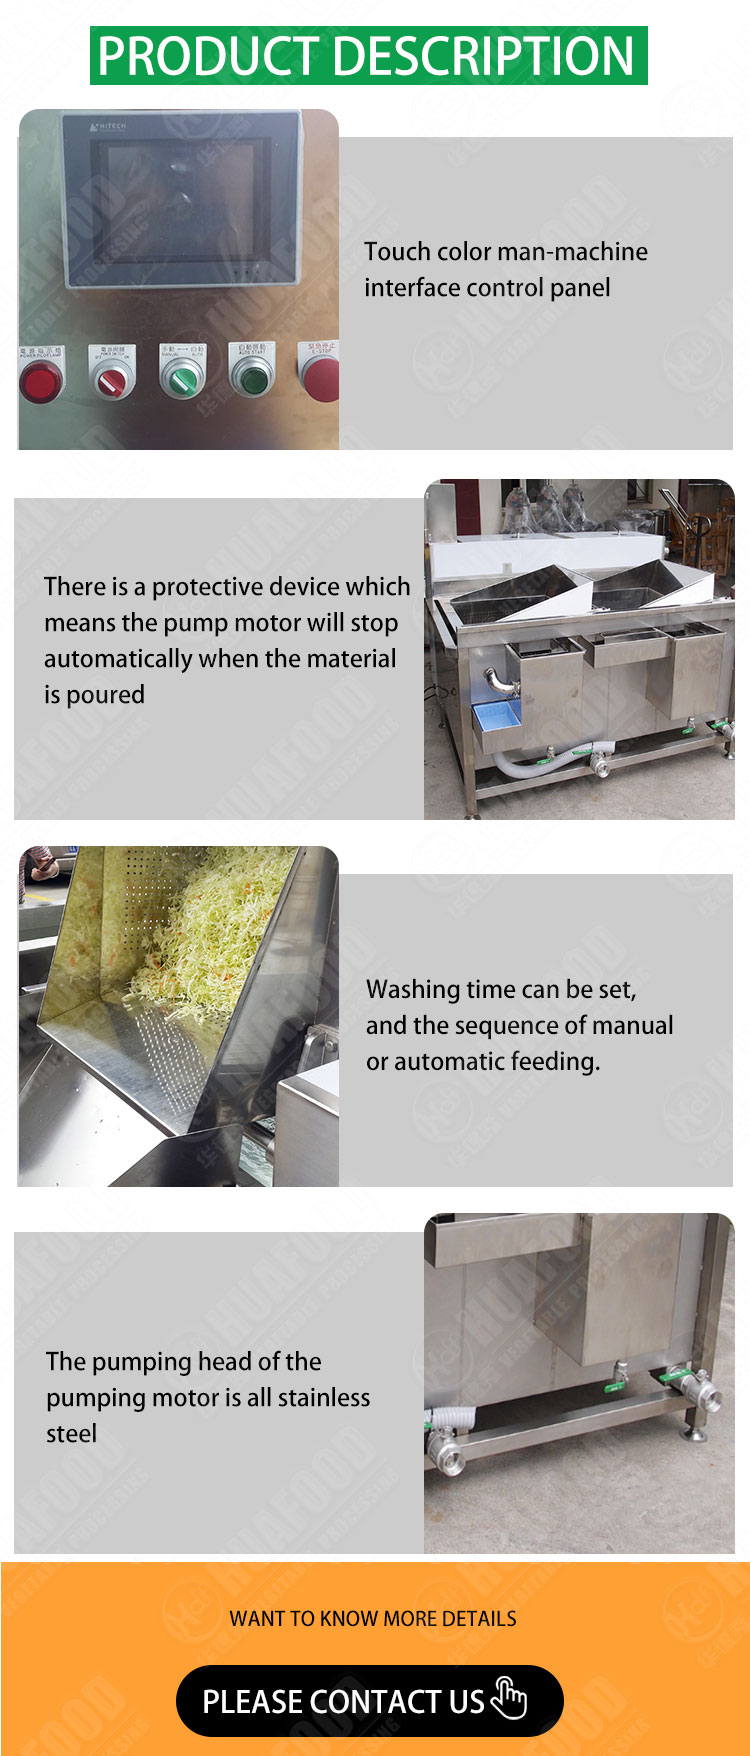 Automatic restaurant vegetable washer with double trough washing machine - Fruit and vegetable washing machine - 2